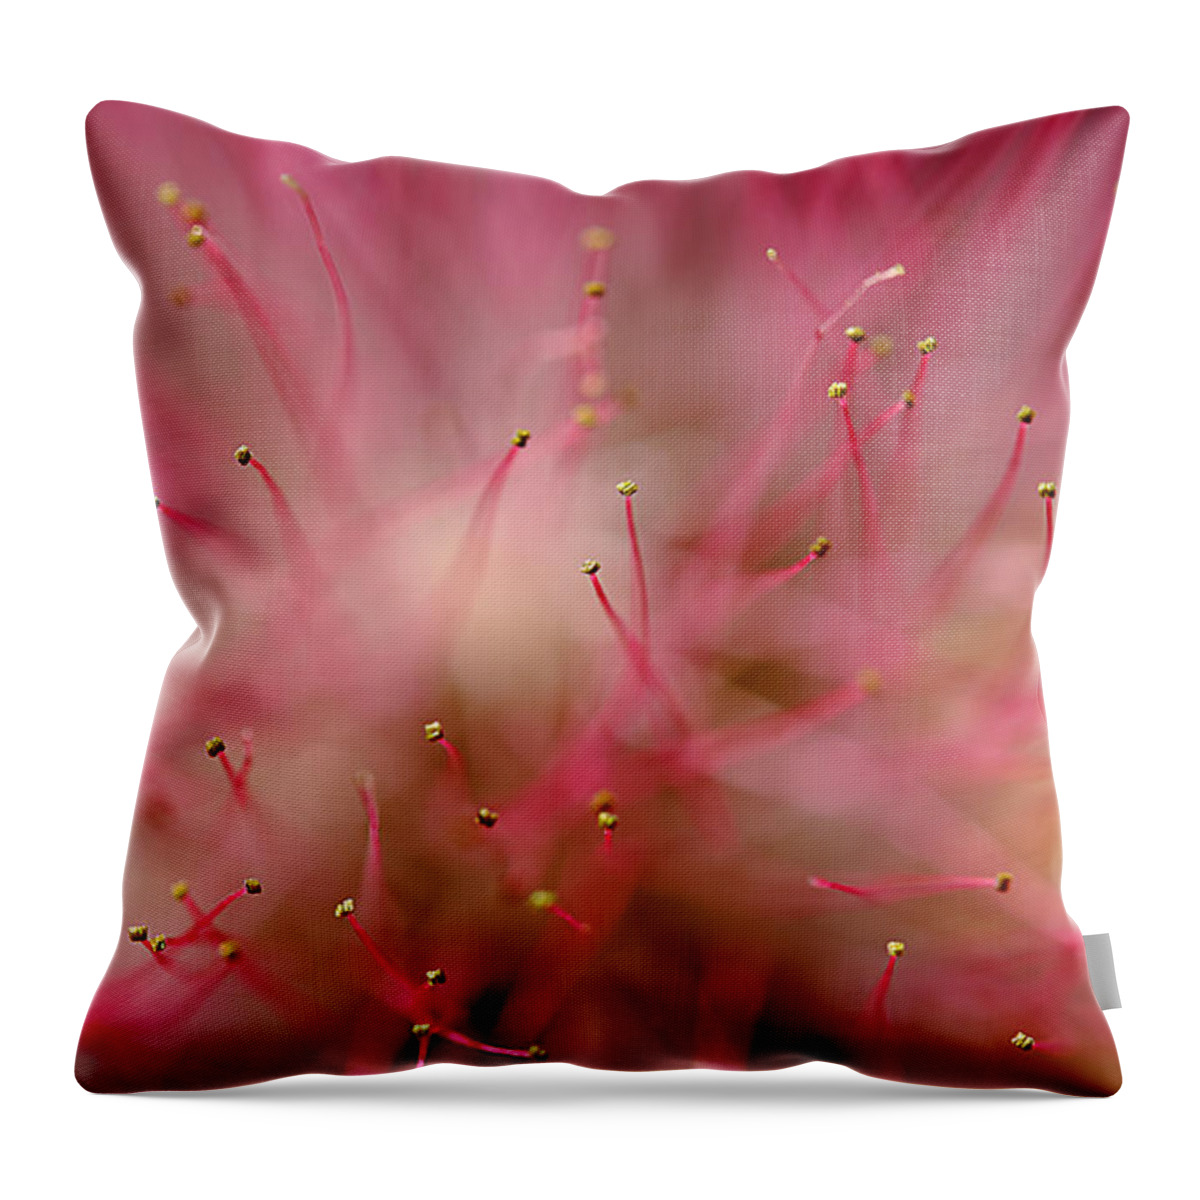 Mimosa Throw Pillow featuring the photograph Mimosa Fireworks by Michael Eingle